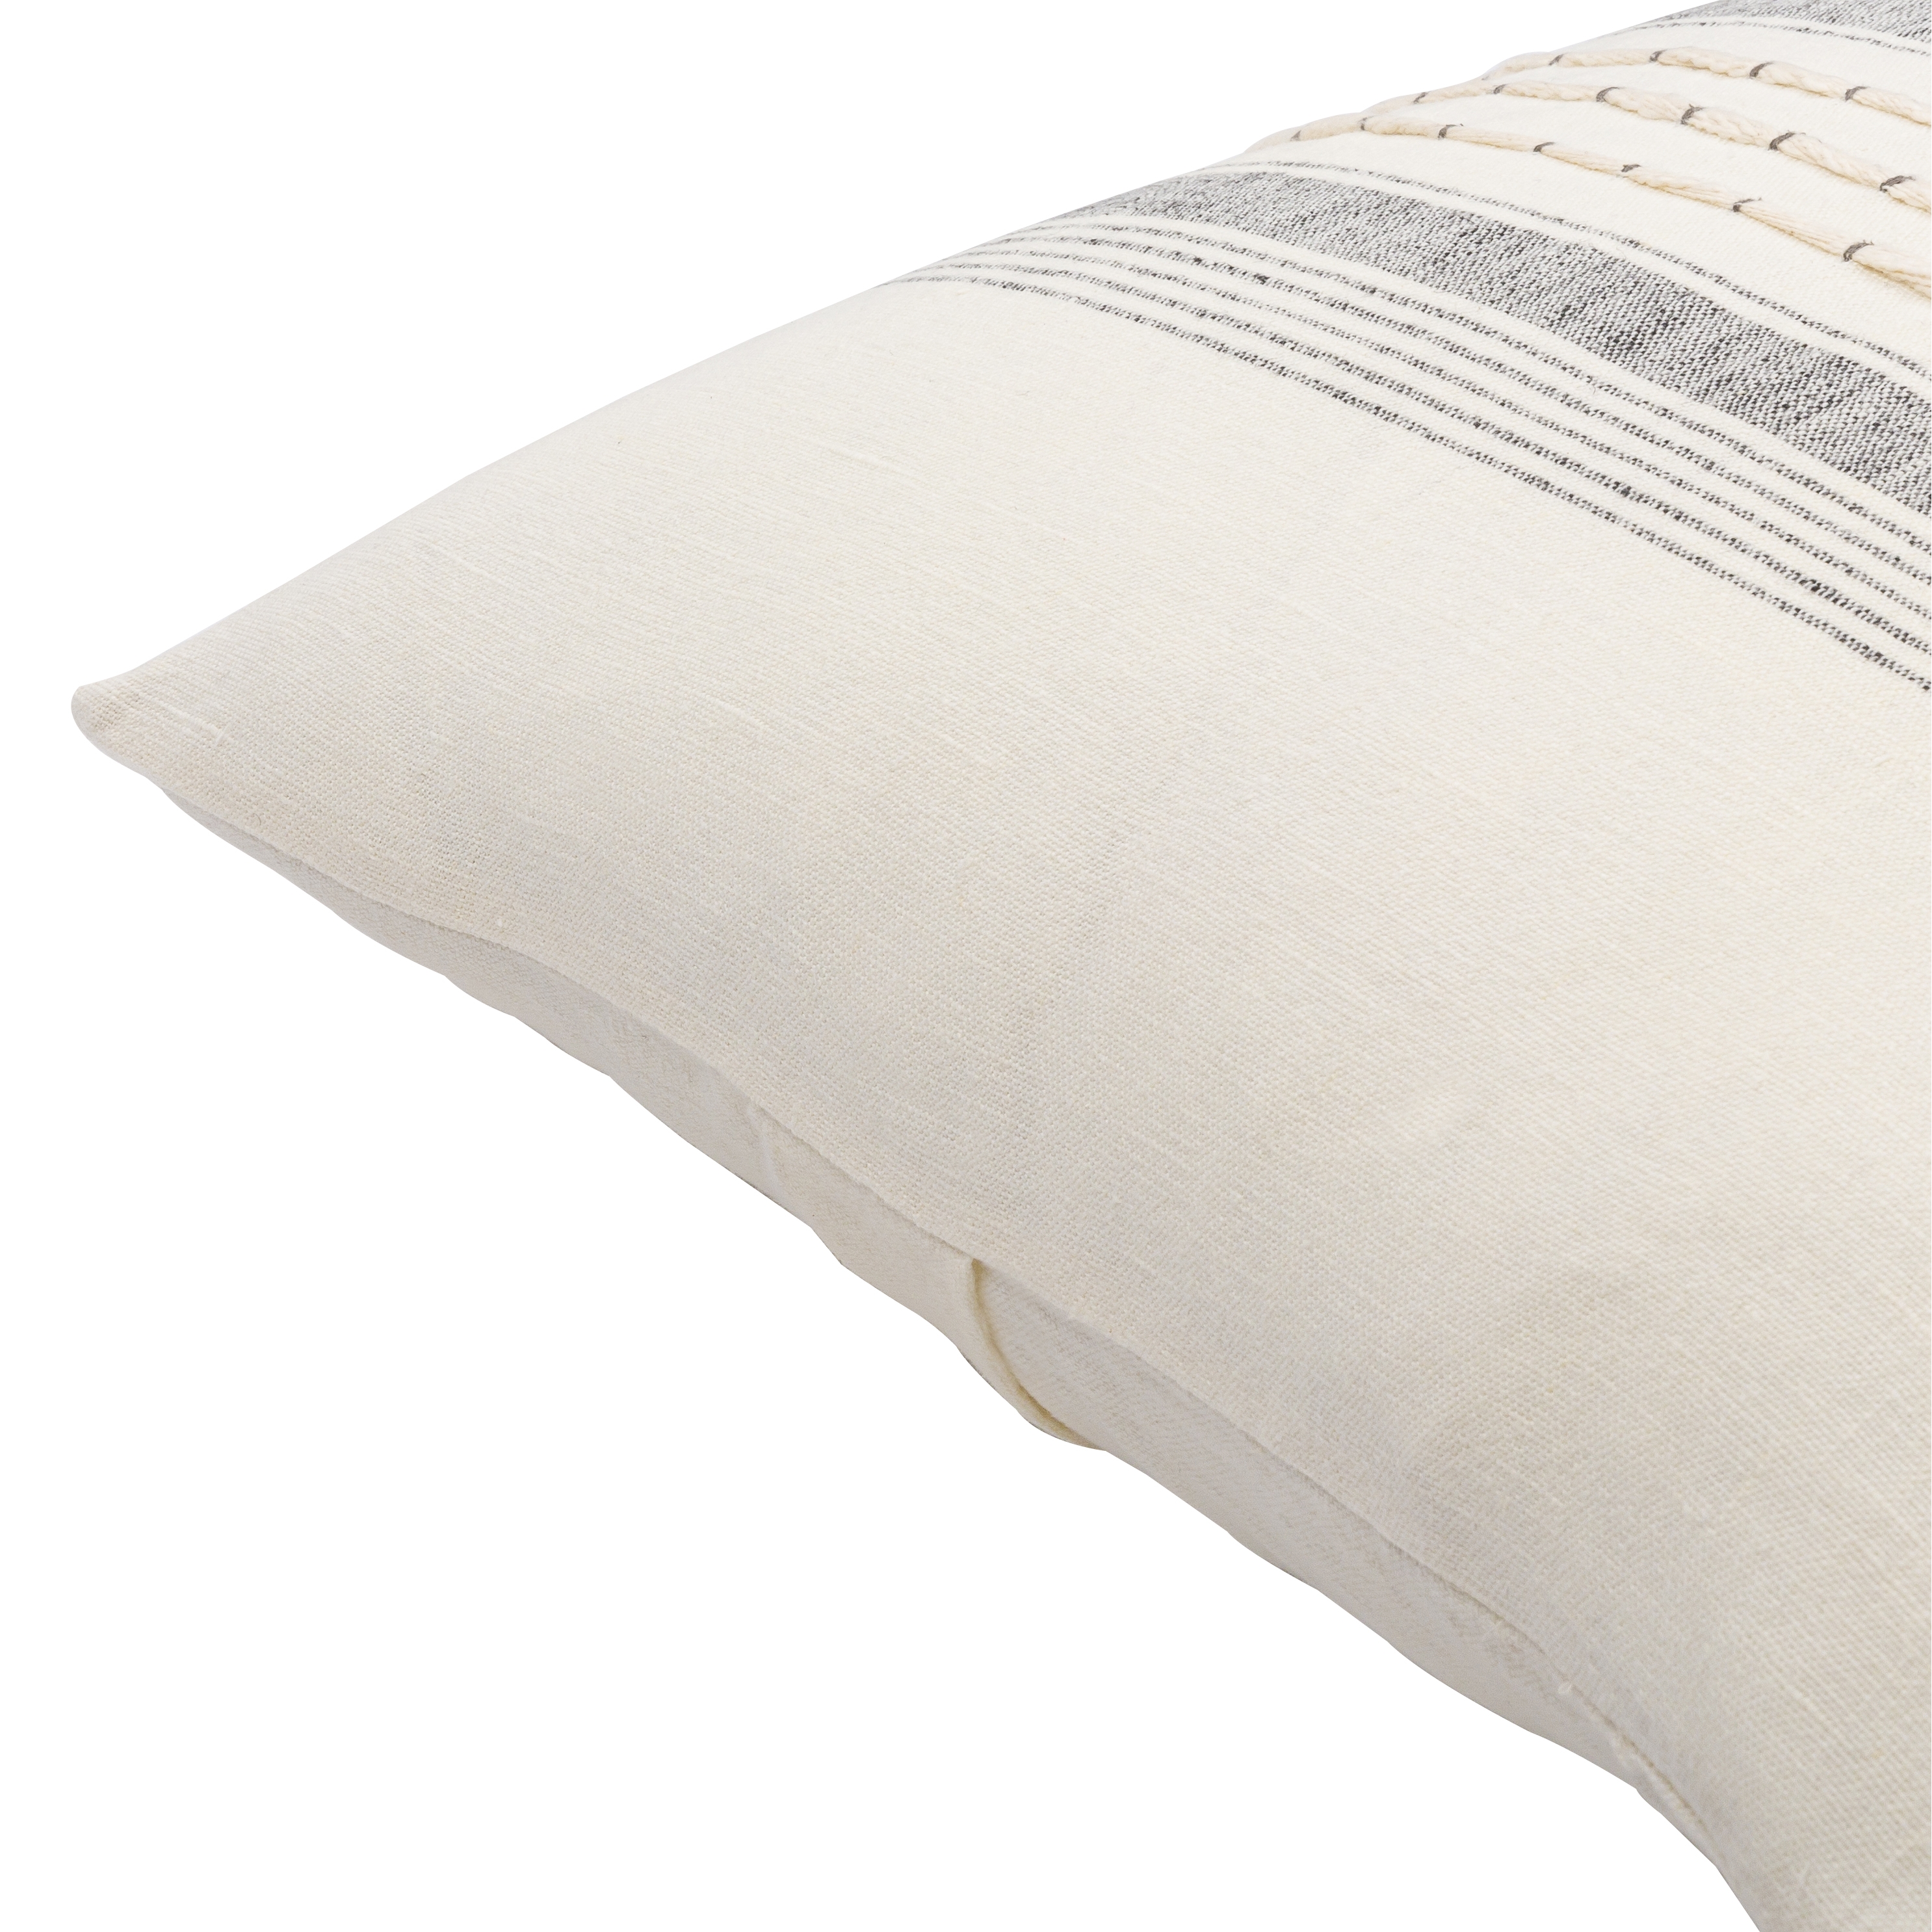 Linen Stripe Embellished Throw Pillow, 18" x 18", with poly insert - Image 1